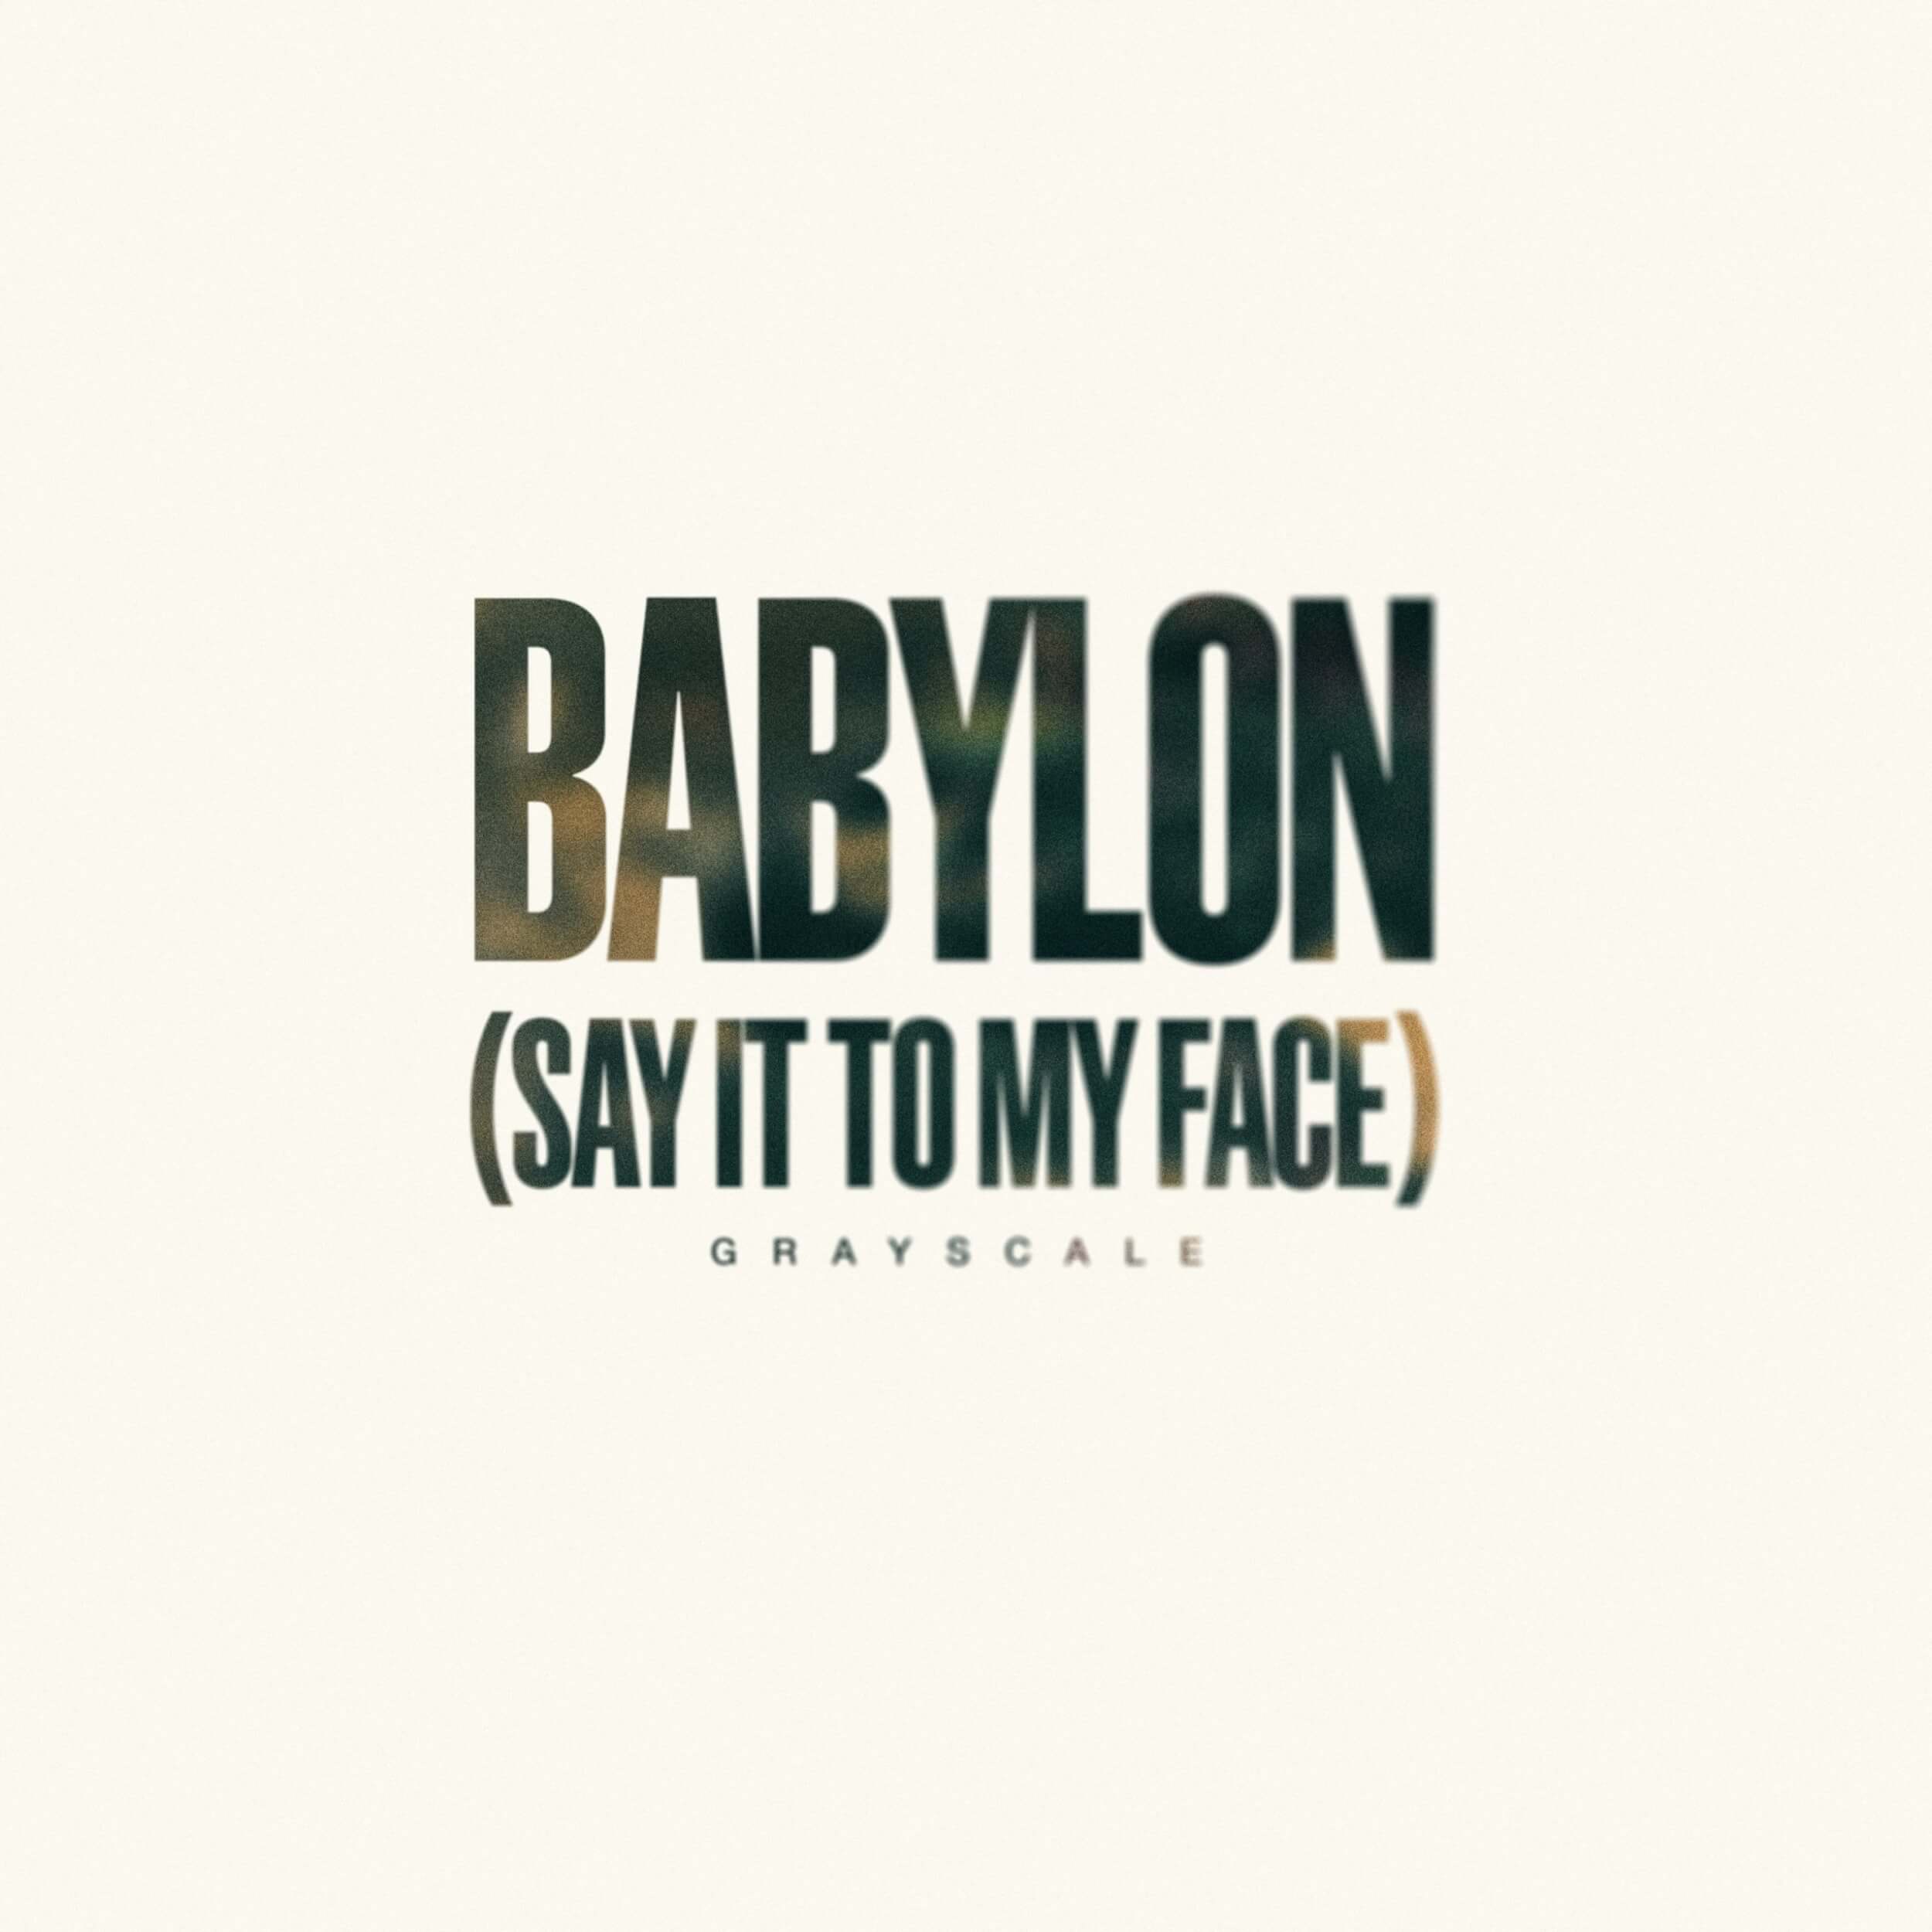 Featured image for “Babylon (Say It To My Face)”